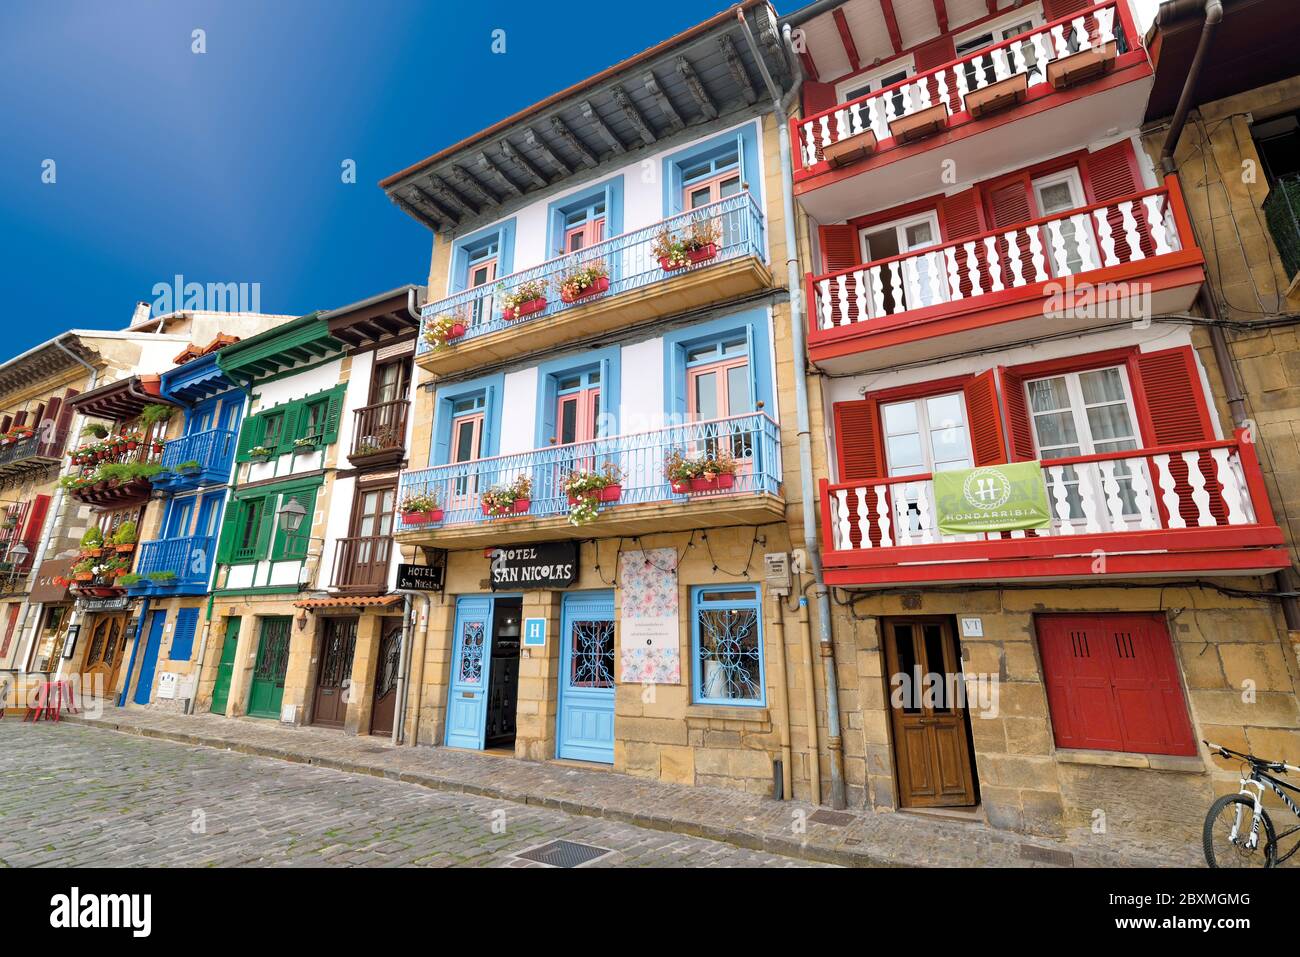 Colorful town houses with balconies and red and blue windows lining a medieval street in town centre of Hondarribia Stock Photo